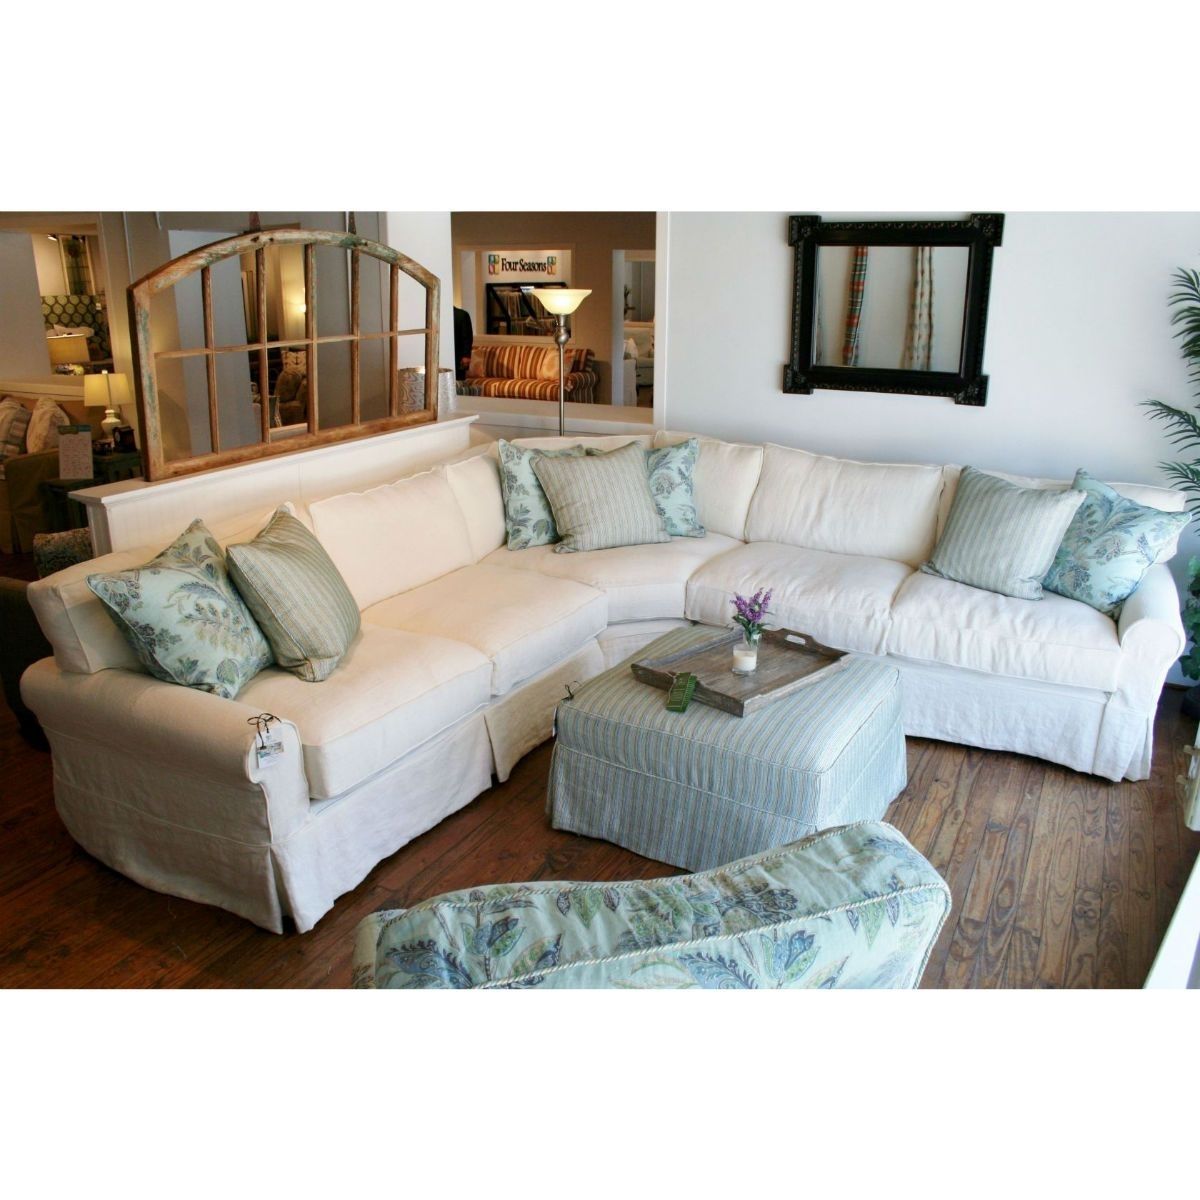 Slipcovered Sectional Sofa Boothbay (daniel) 108x108 | Coastal Within Tampa Sectional Sofas (View 7 of 10)